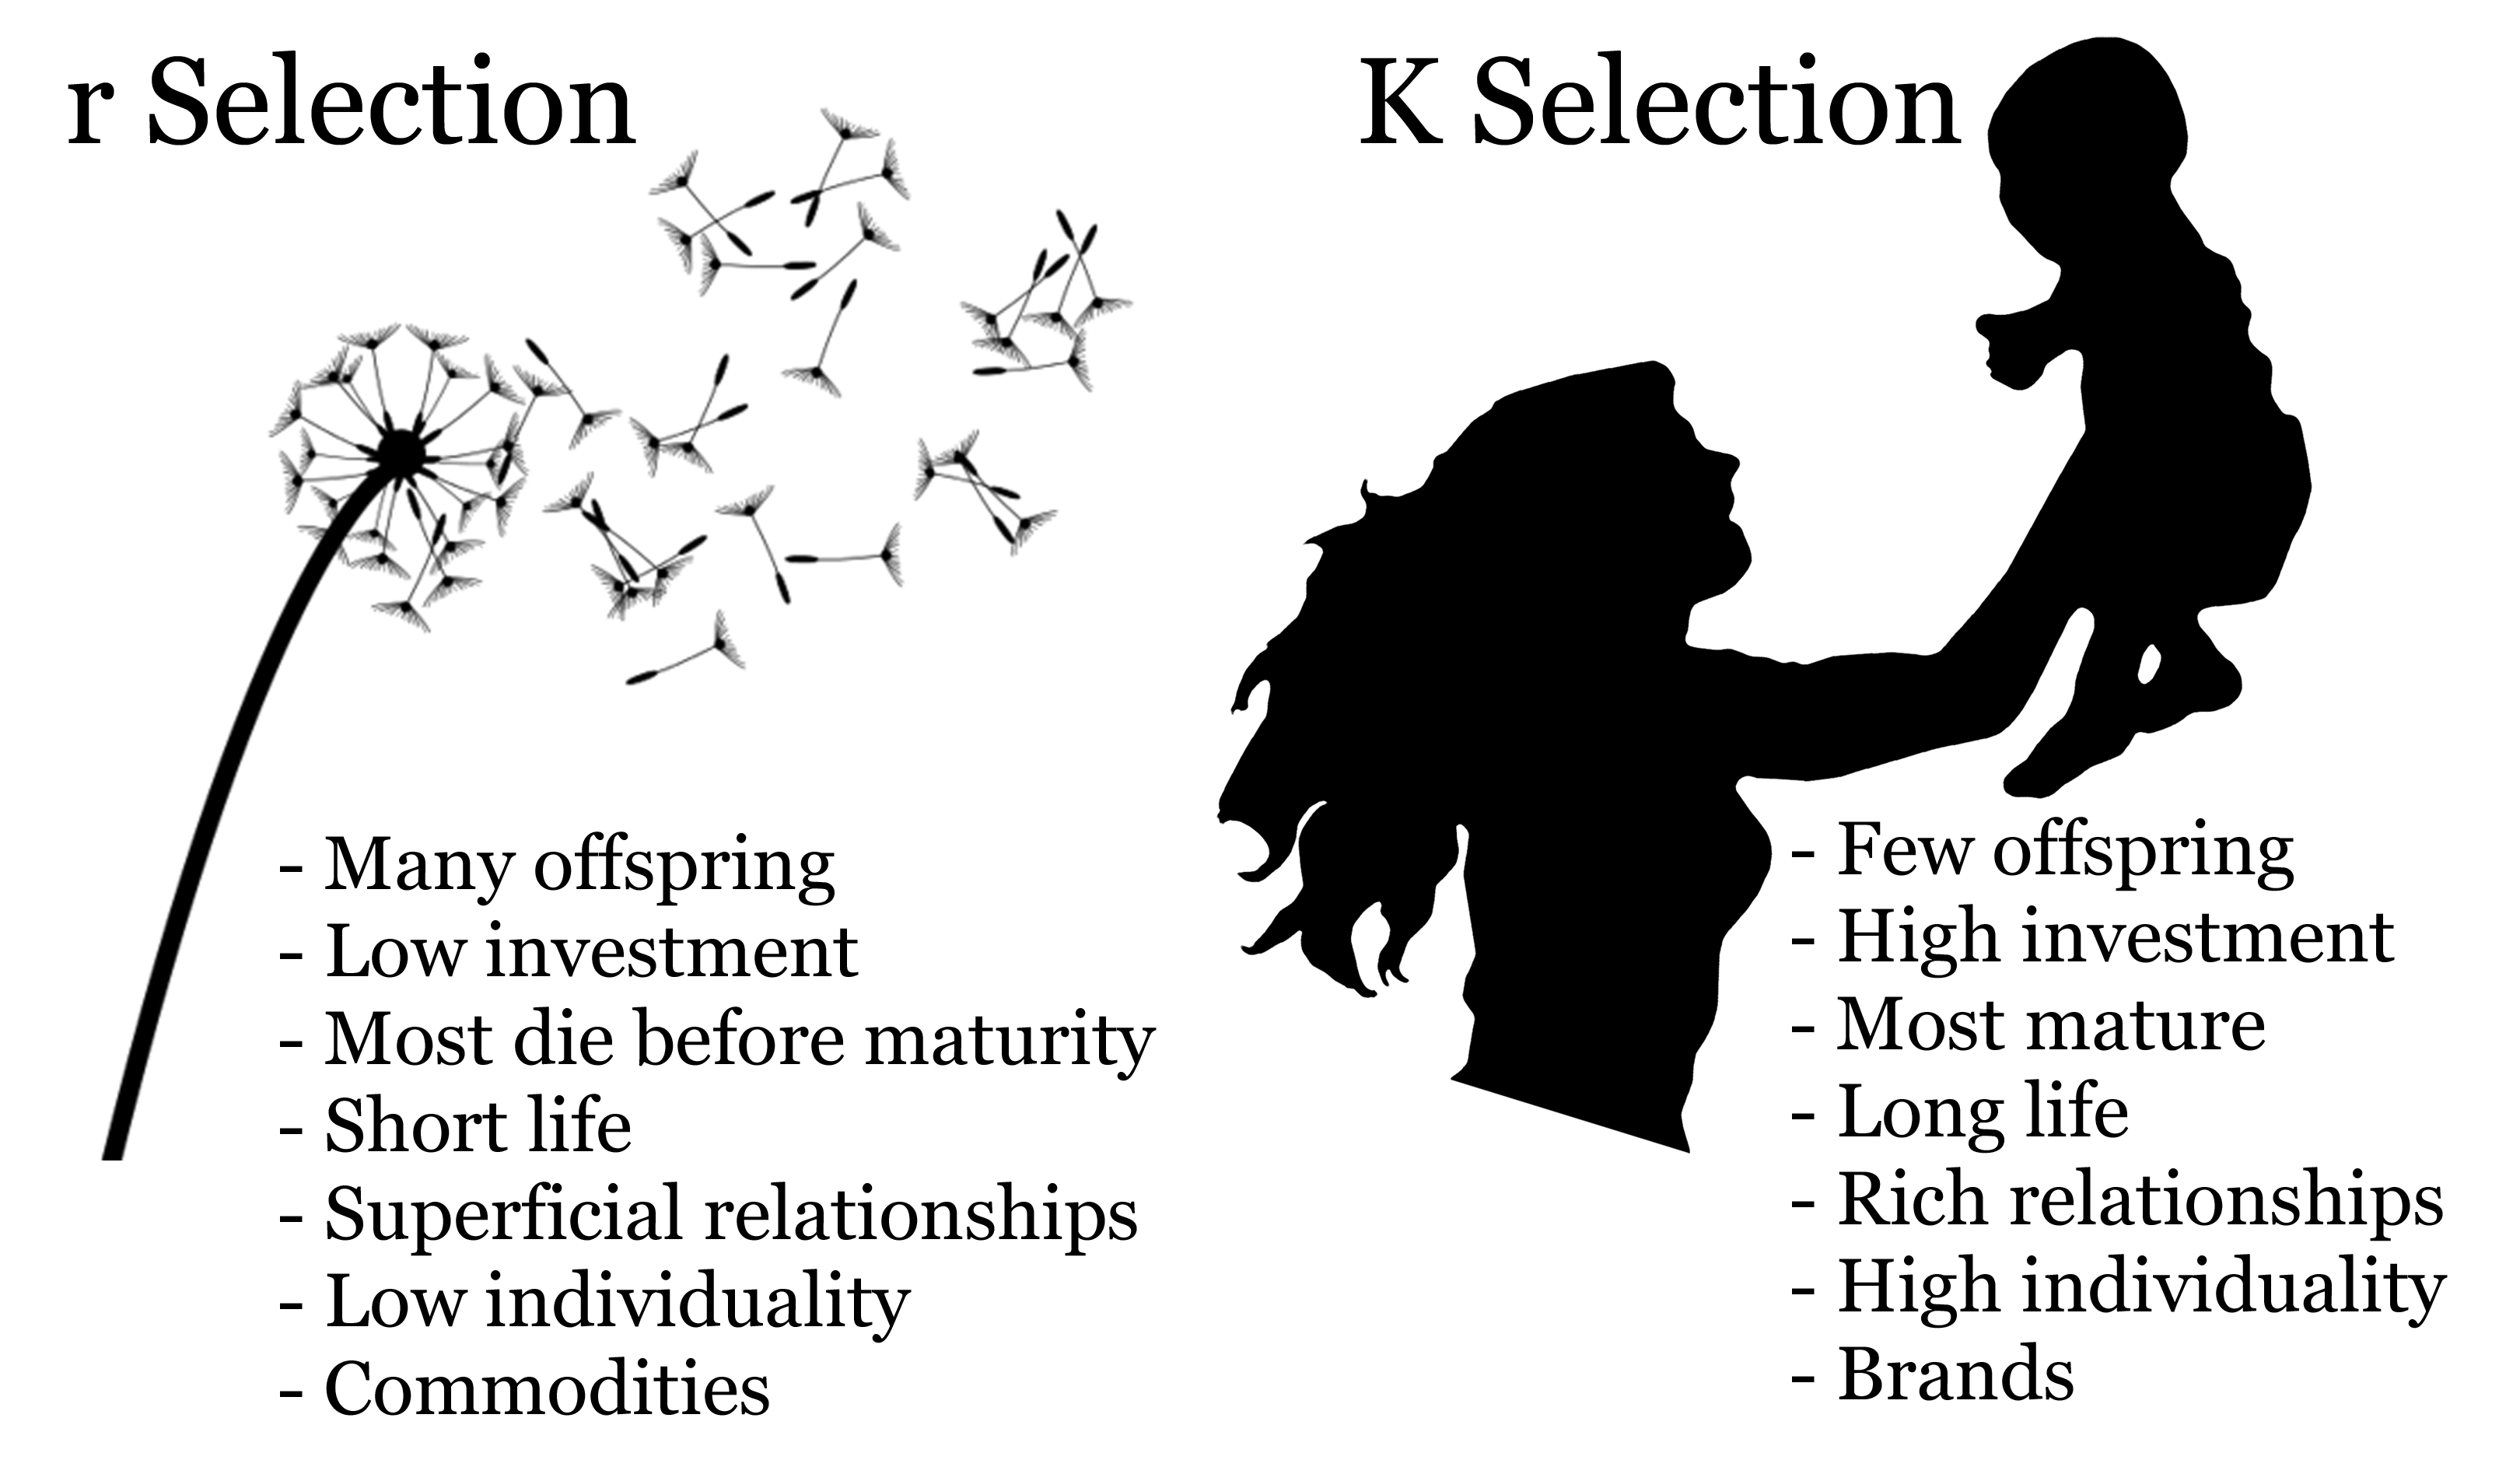 r selection and K selection in marketing: r selection produces many  offspring, and requires